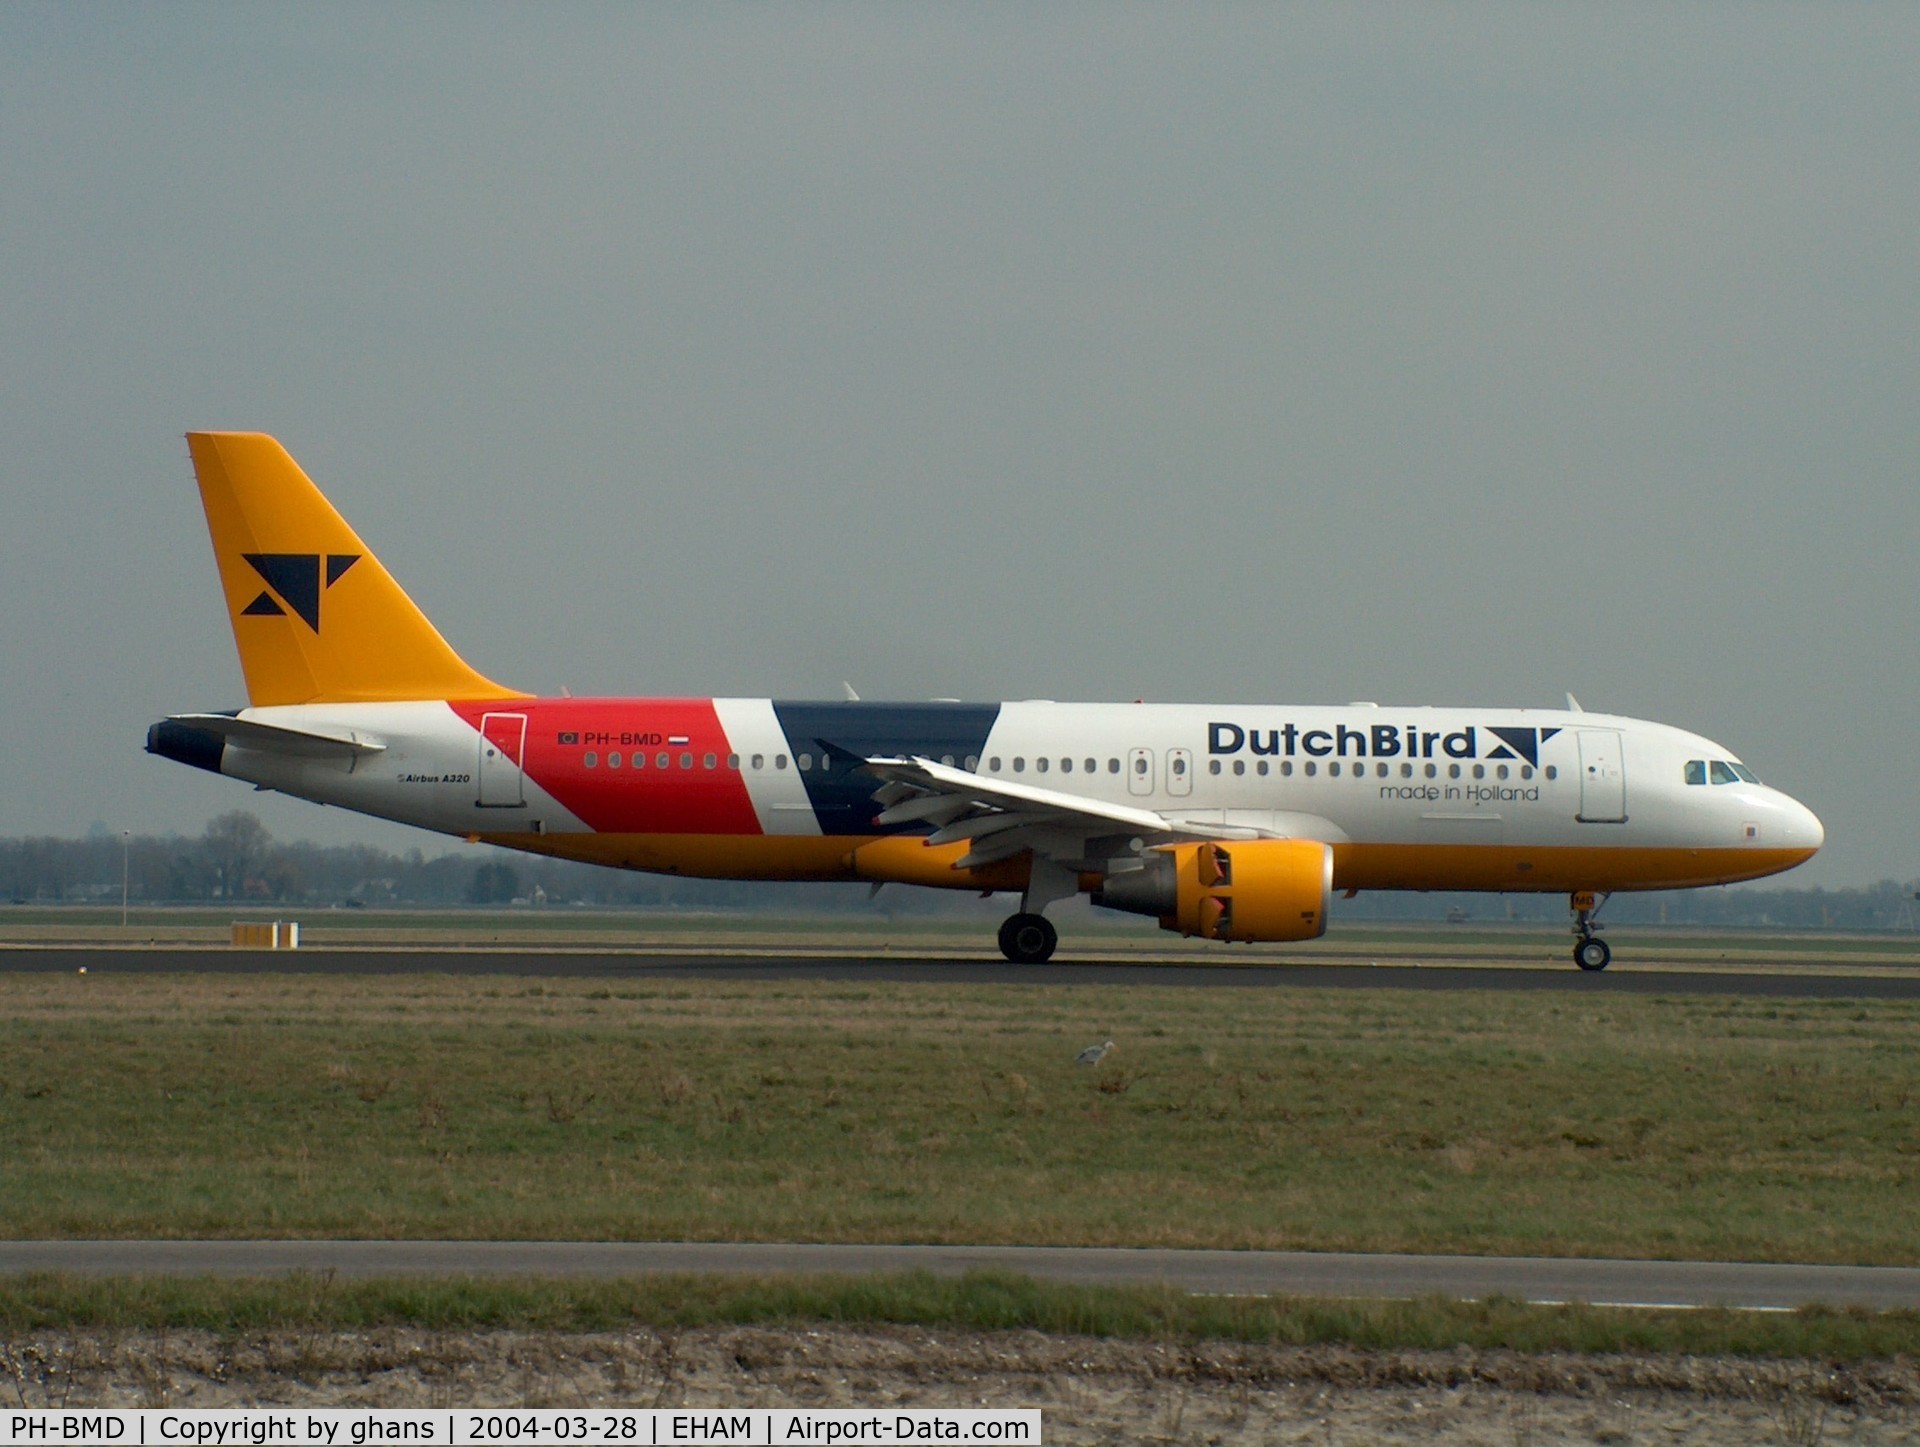 PH-BMD, 2000 Airbus A320-214 C/N 1370, On runway